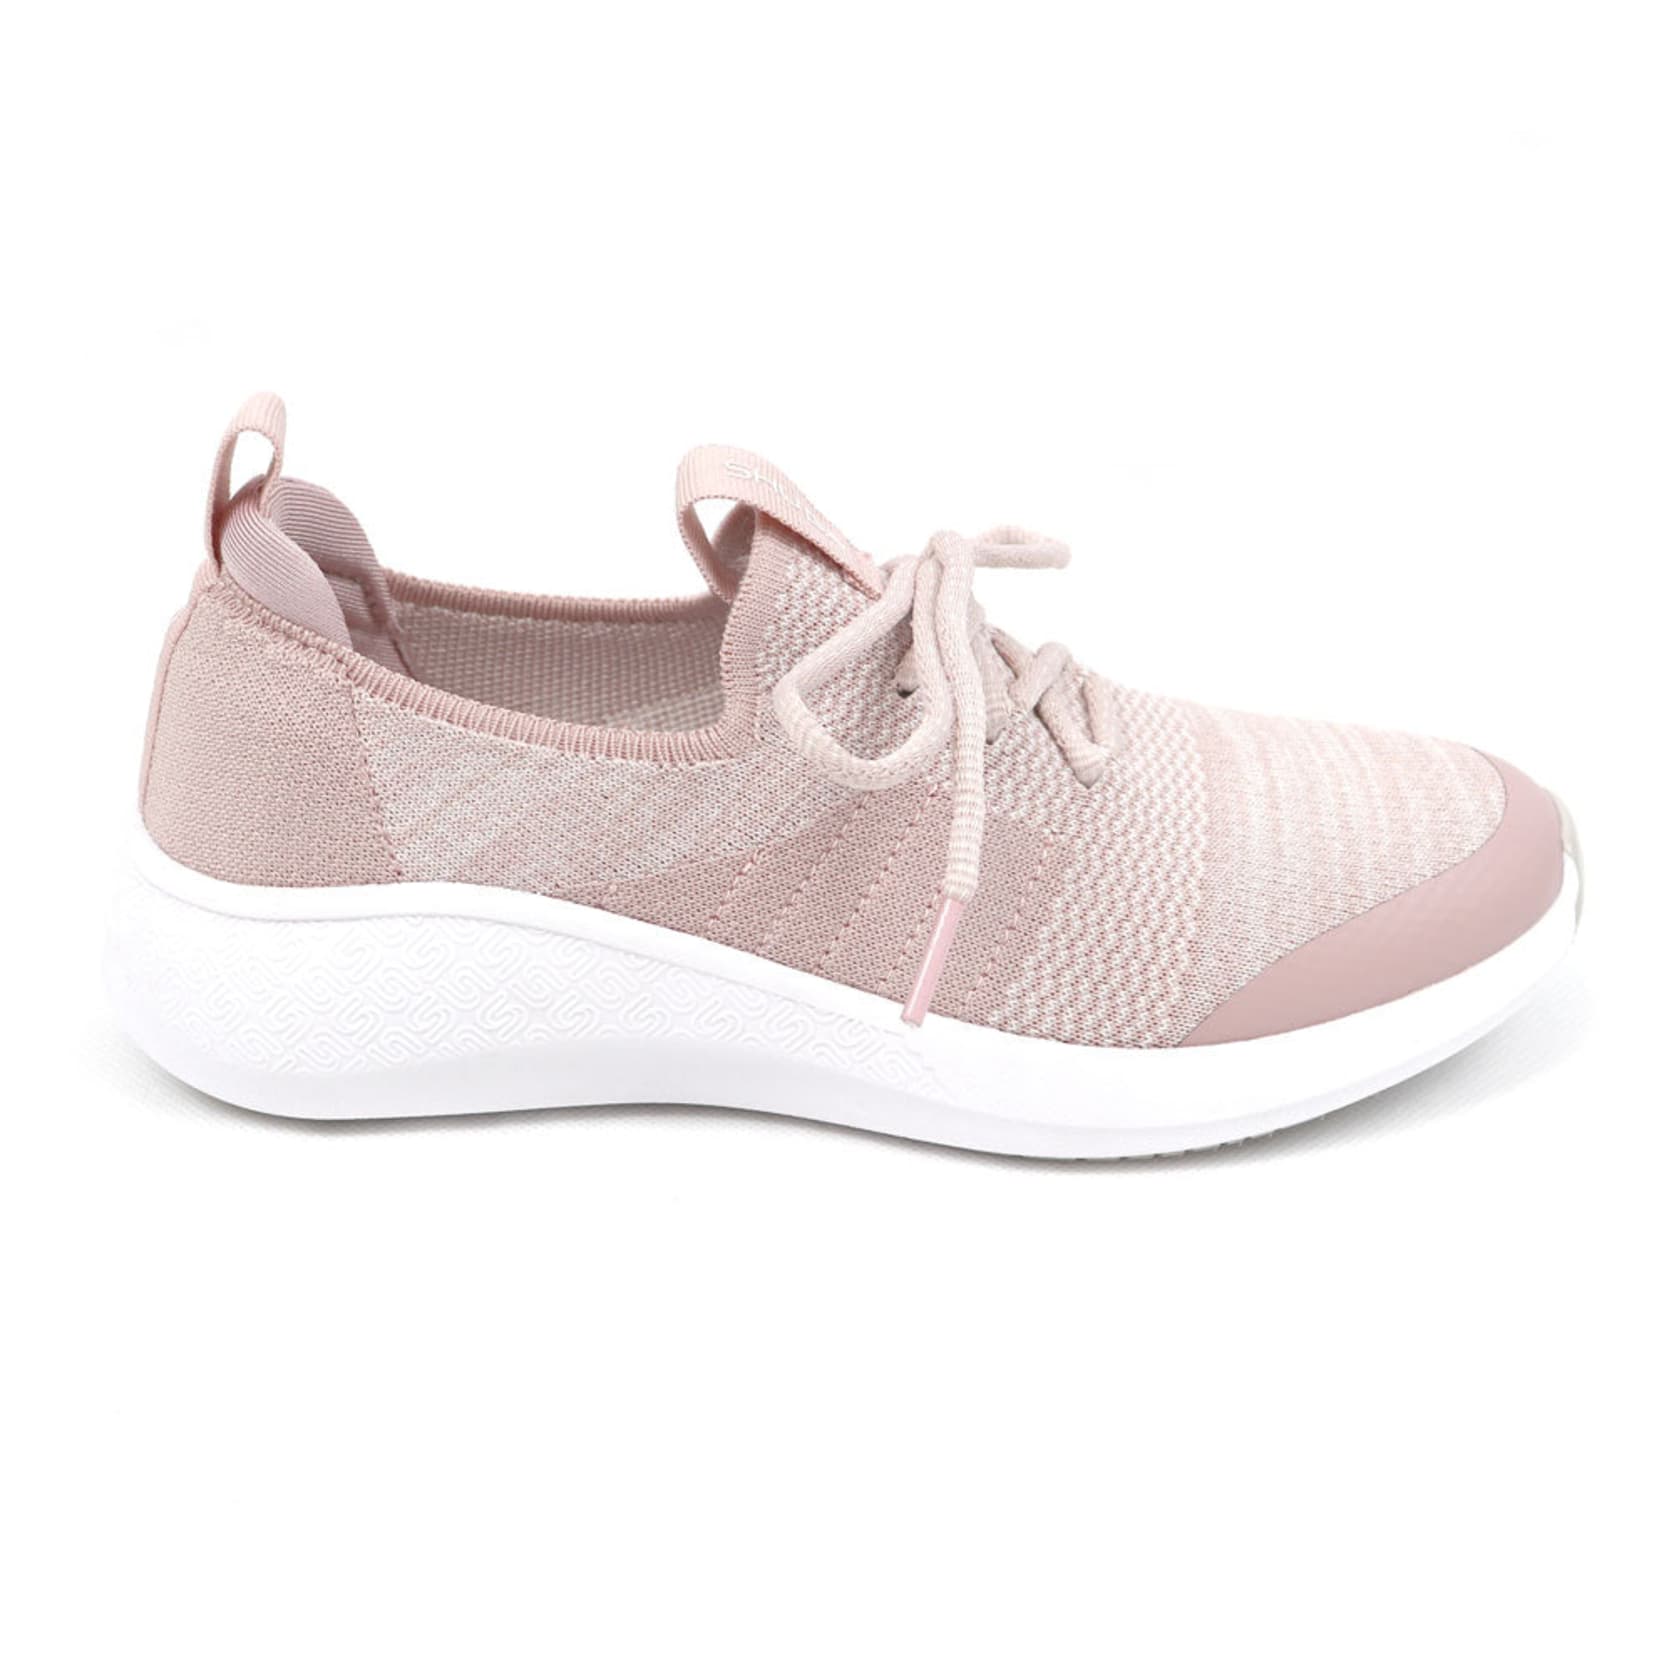 Jessica Lace-up Trainer in Dusty Pink